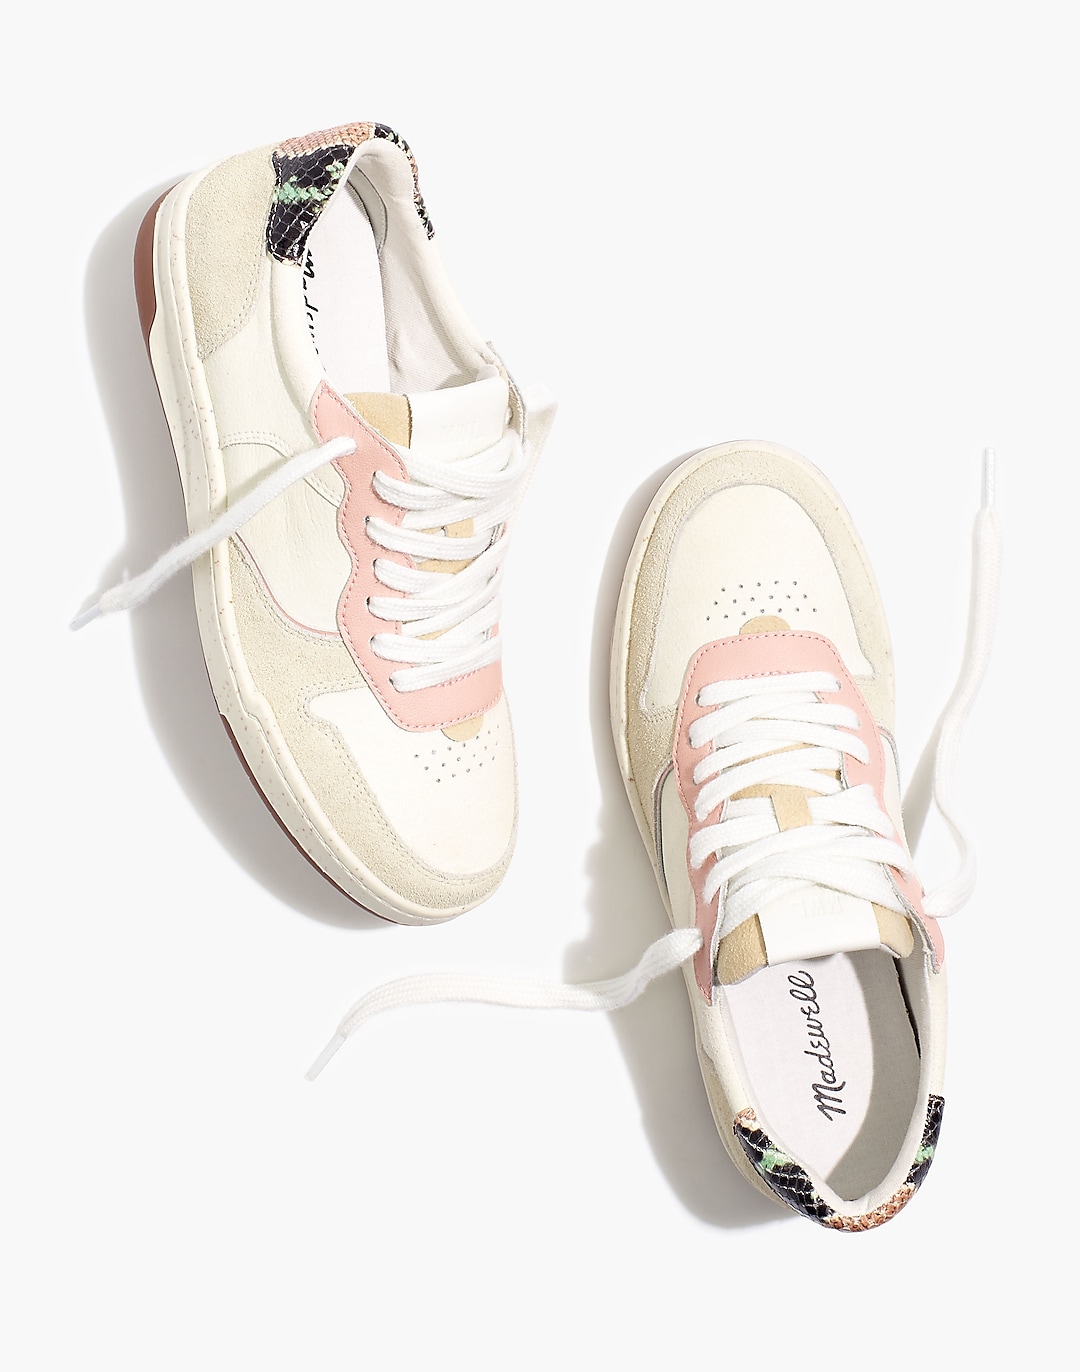 Court Sneakers in Colorblock Suede Snakeskin Embossed Leather